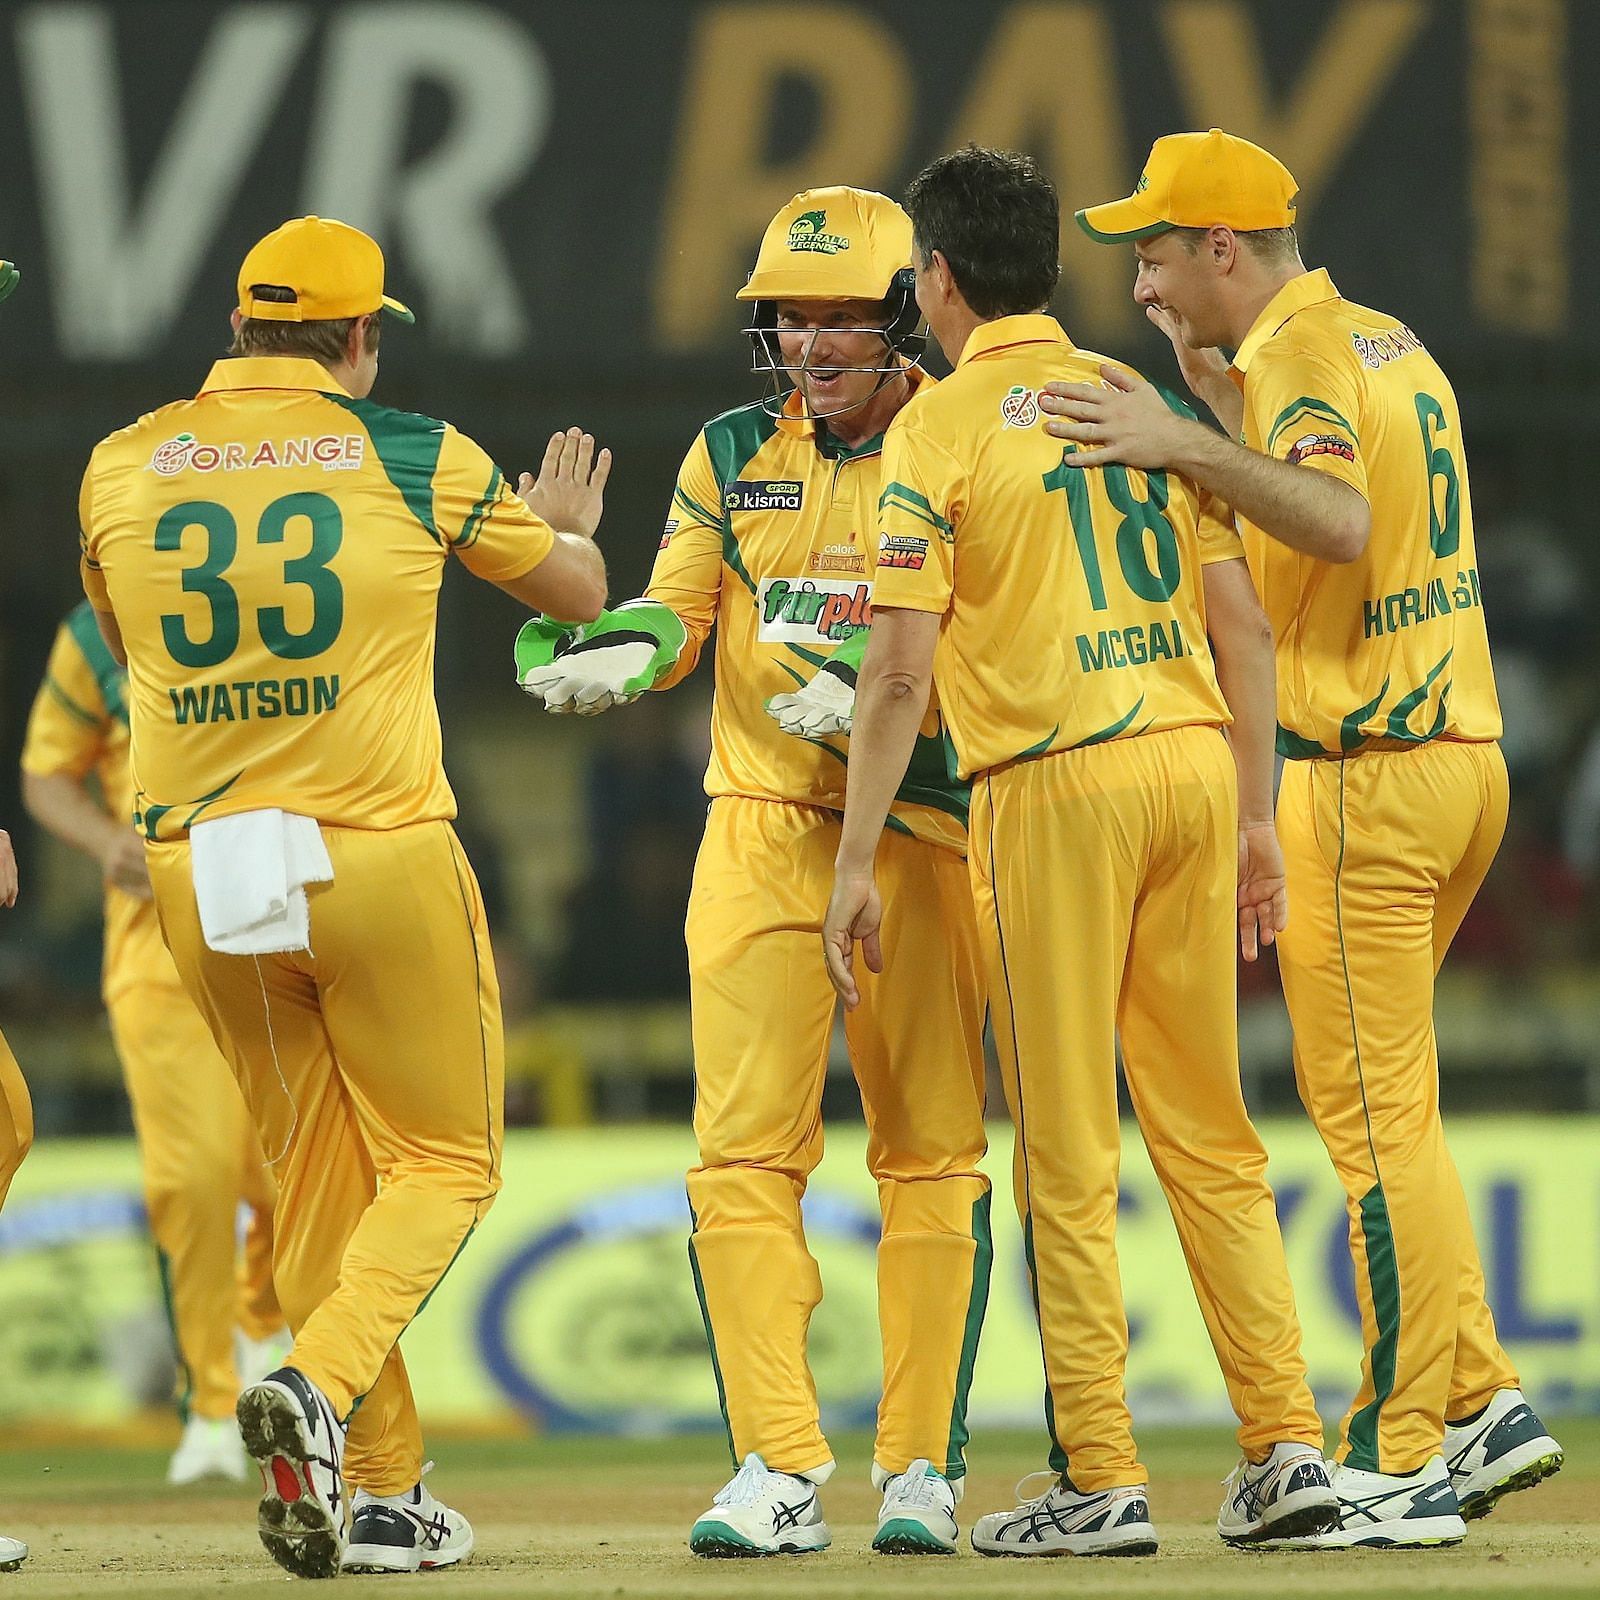 Australia Legends in action (Image Courtesy: News18)